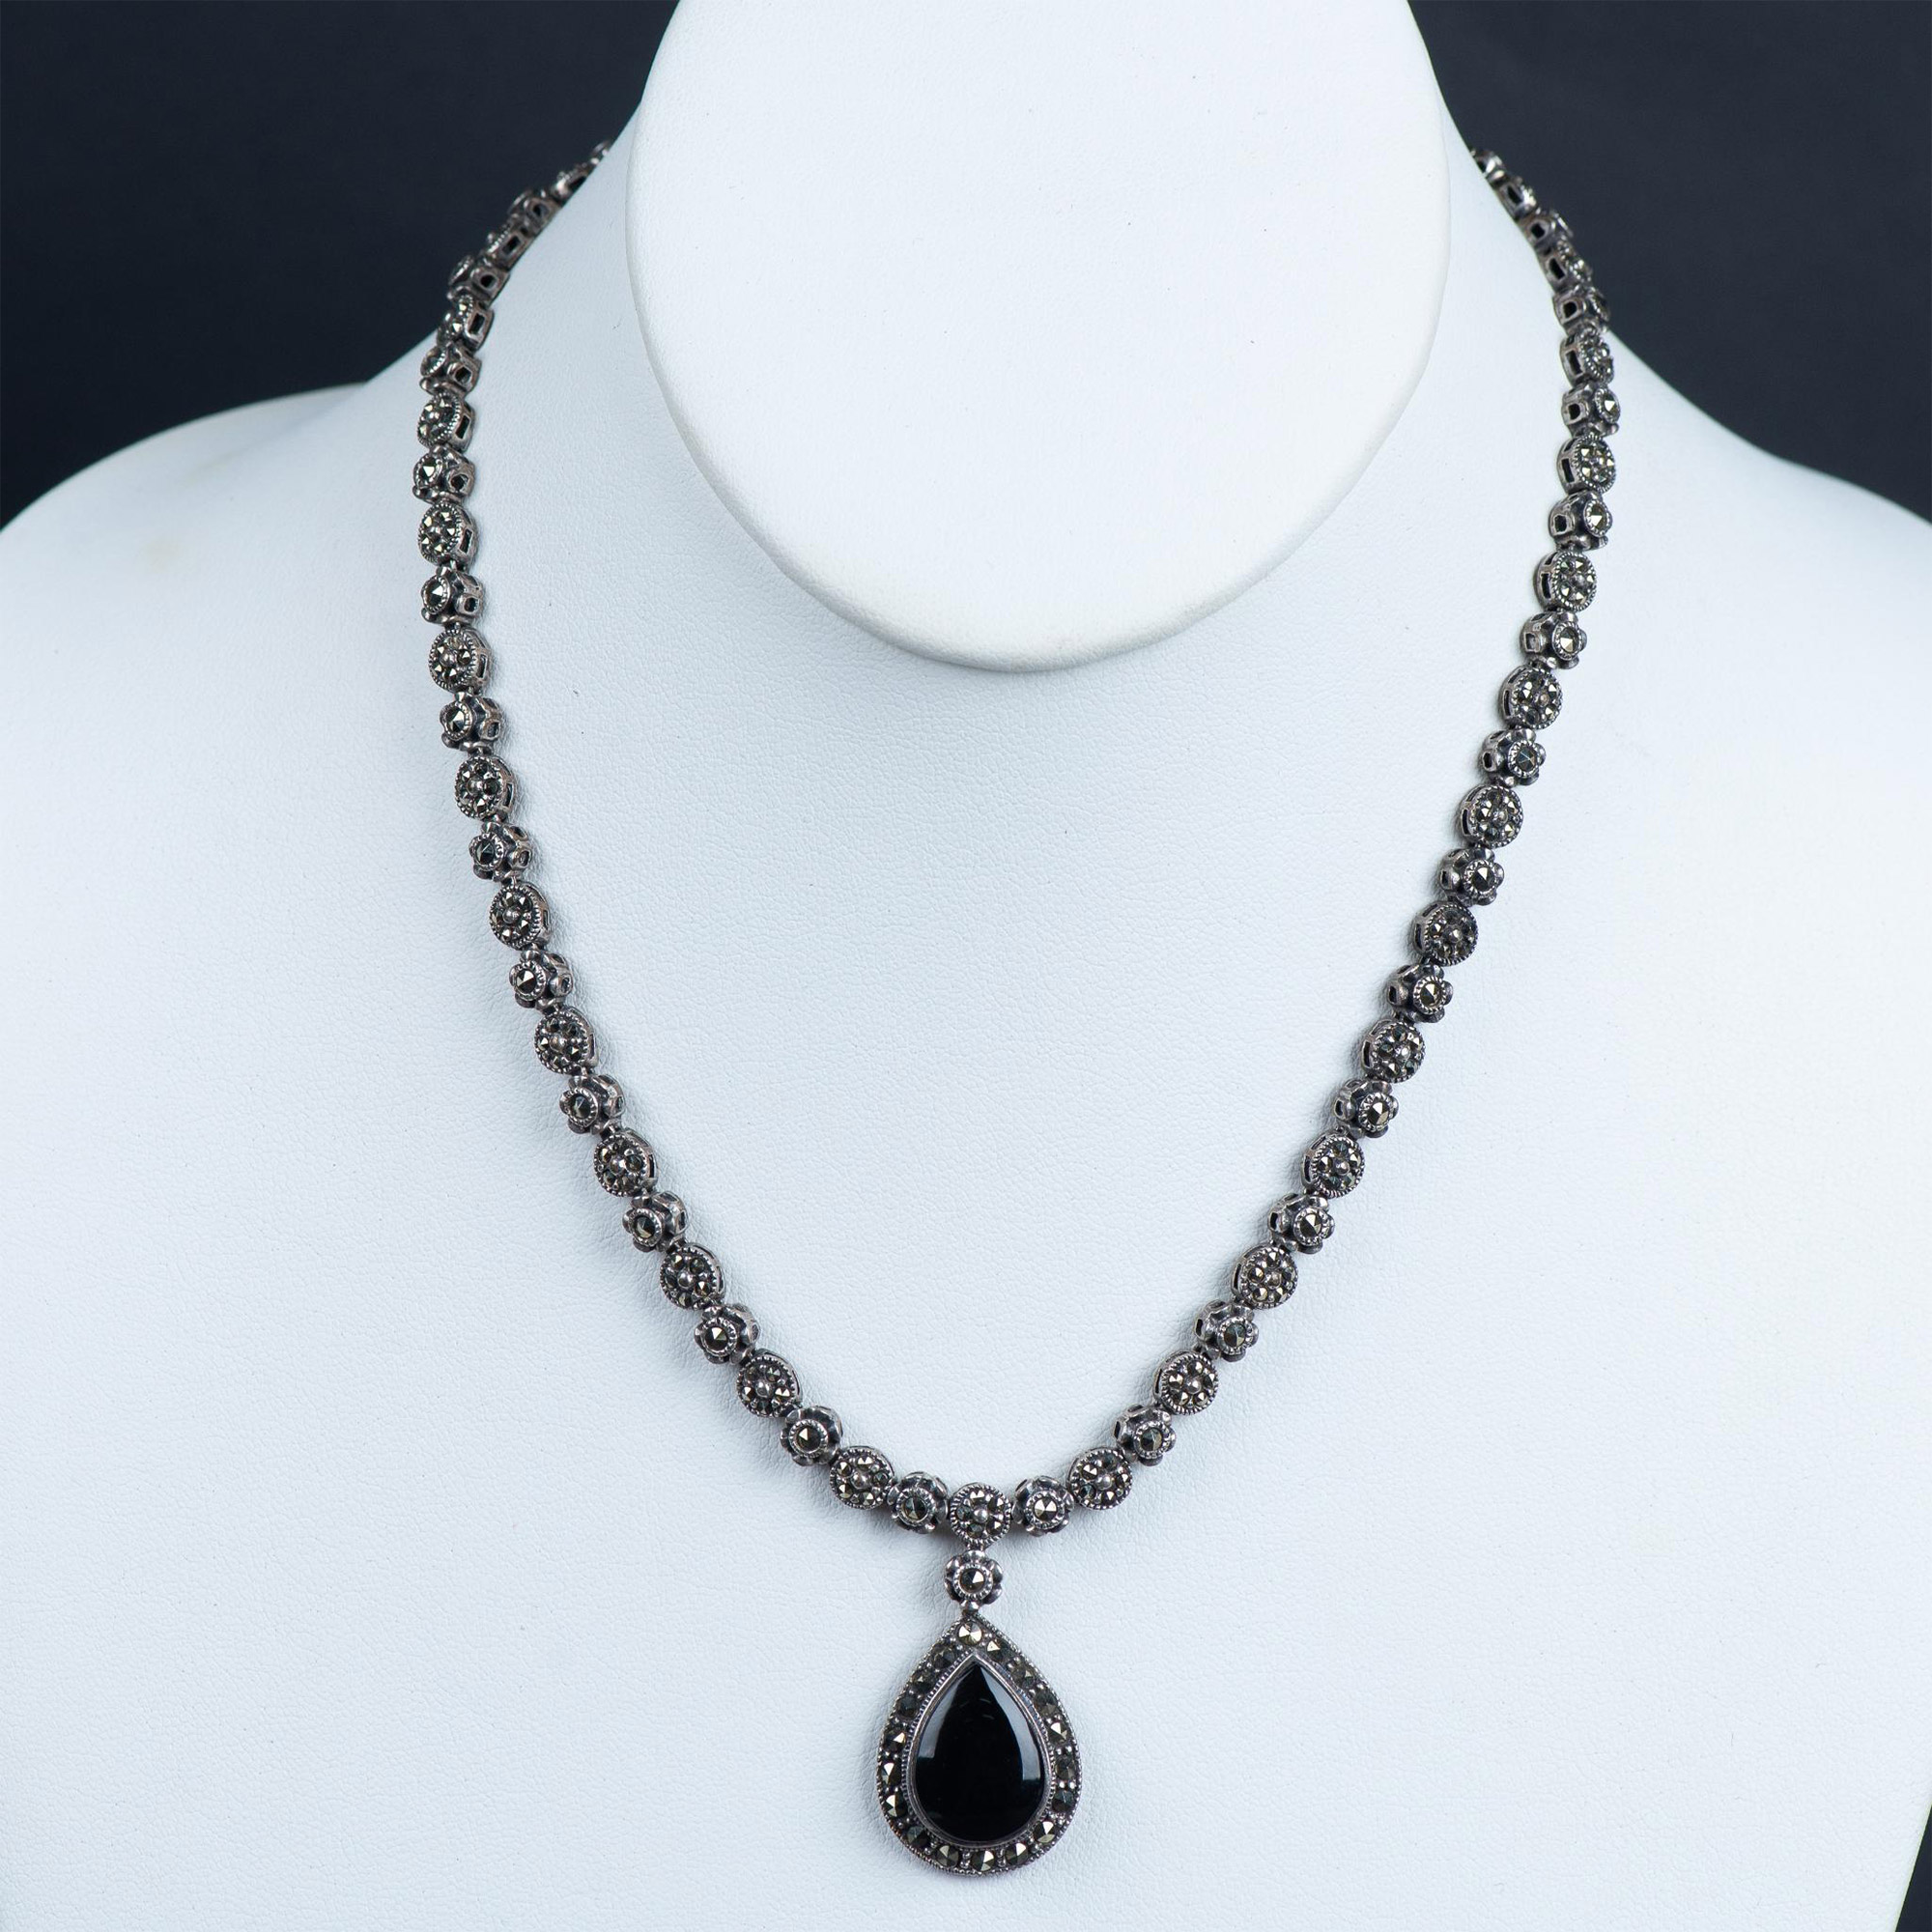 Pretty Sterling Silver, Marcasite, and Onyx Necklace - Image 2 of 6